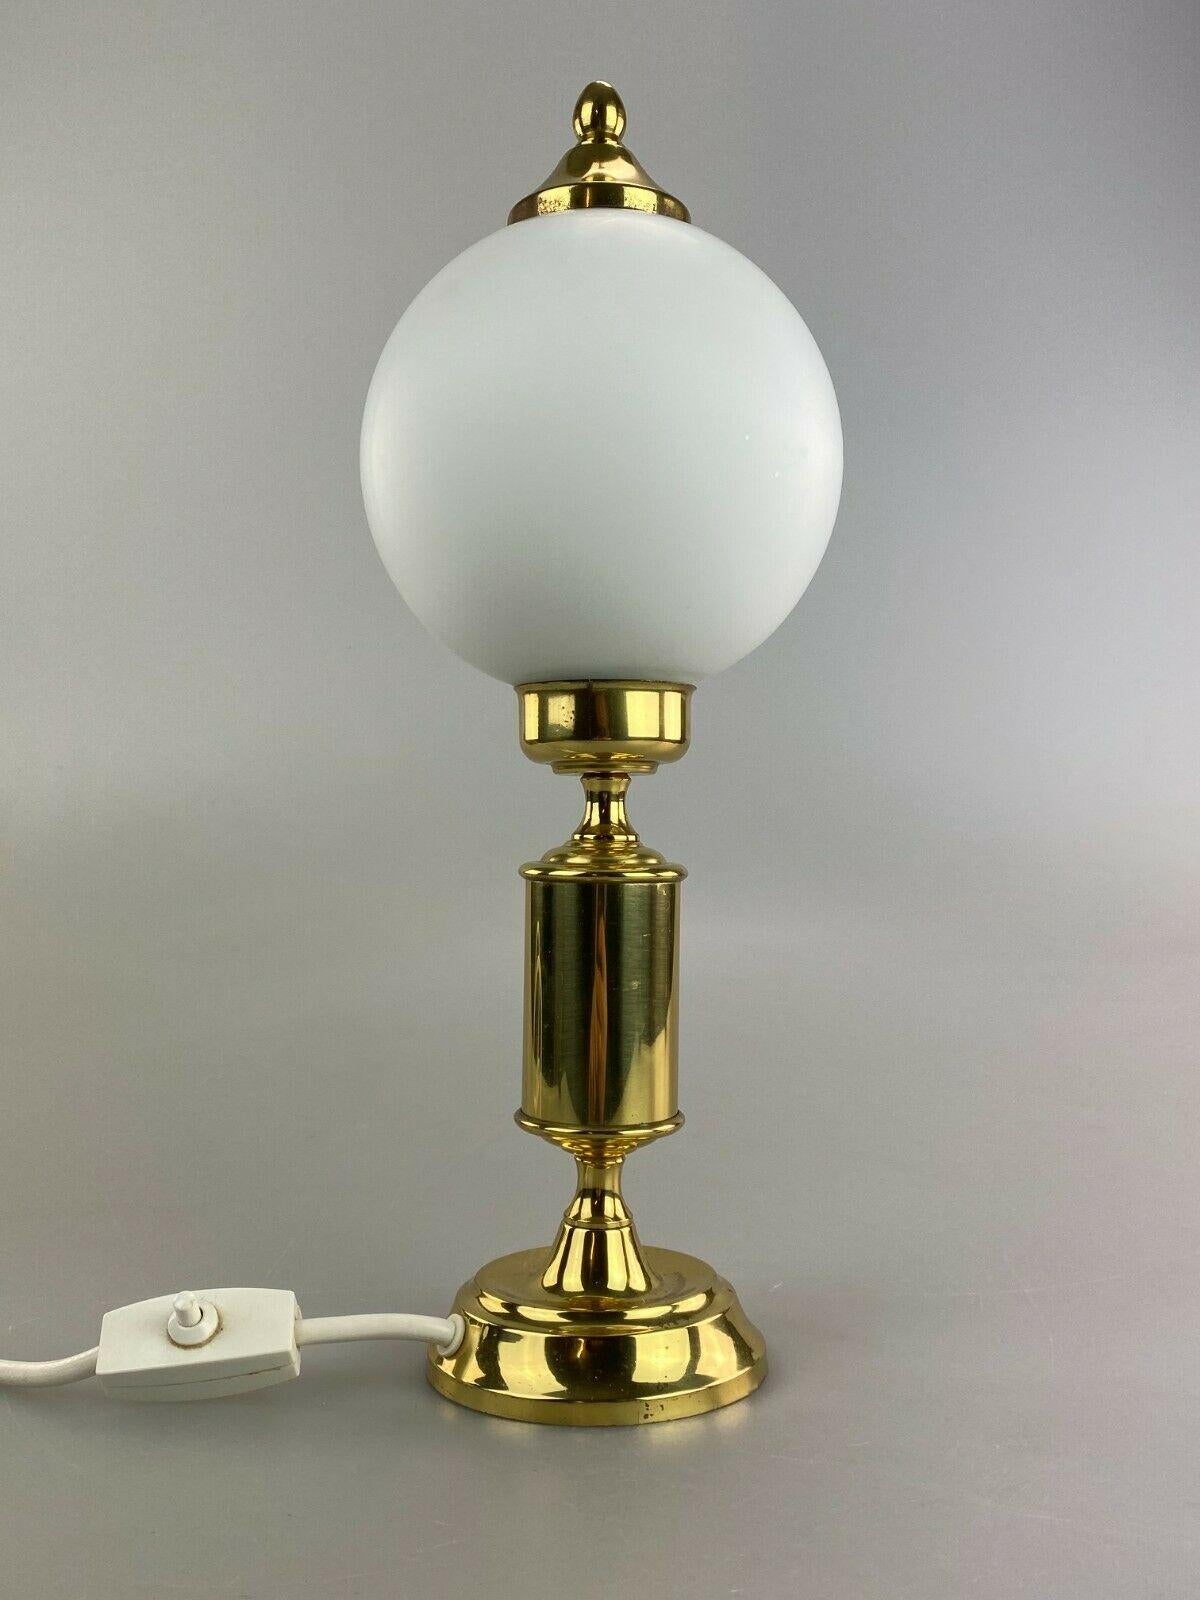 60s 70s ball lamp light table lamp bedside lamp space age design

Object: spherical lamp

Manufacturer:

Condition: good

Age: around 1960-1970

Dimensions:

Diameter = 13.5cm
Height = 37cm

Other notes:

The pictures serve as part